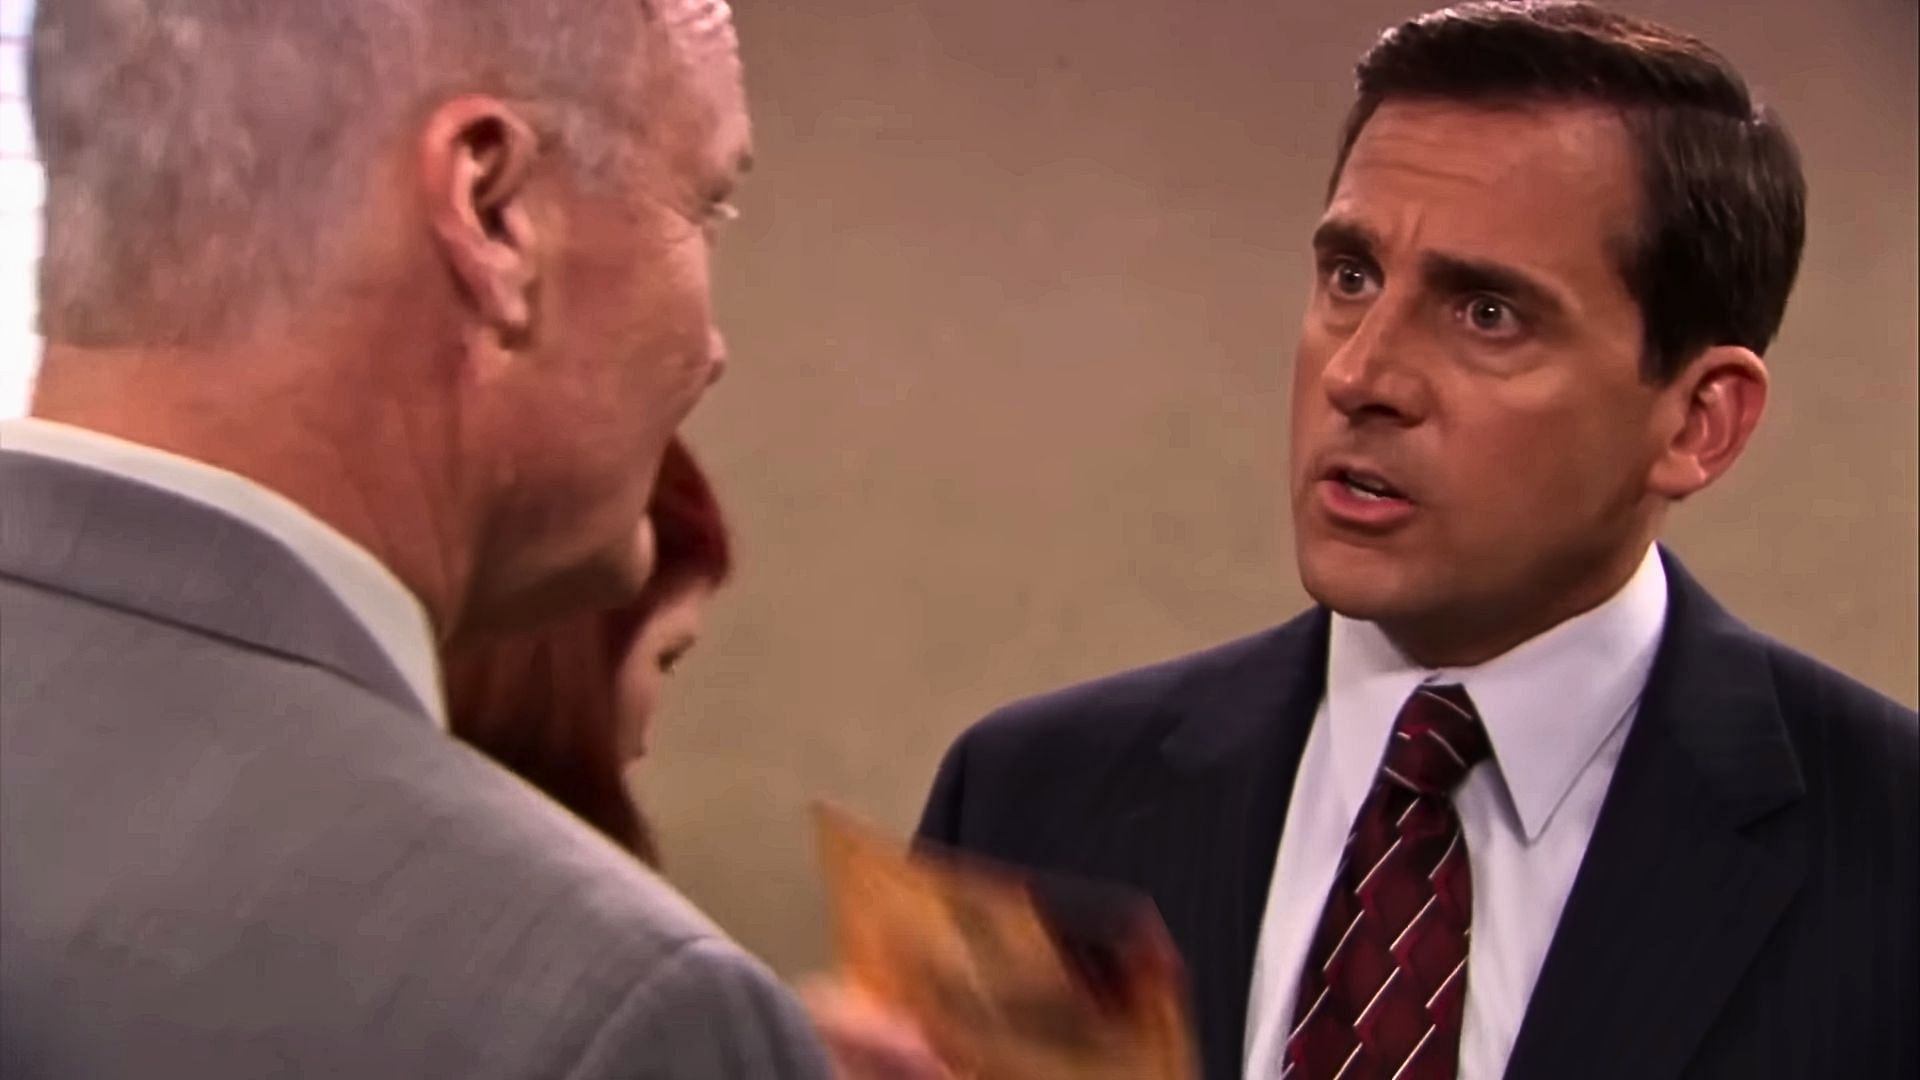 Michael Scott, played by Steve Carell (Image via YouTube/The Office)